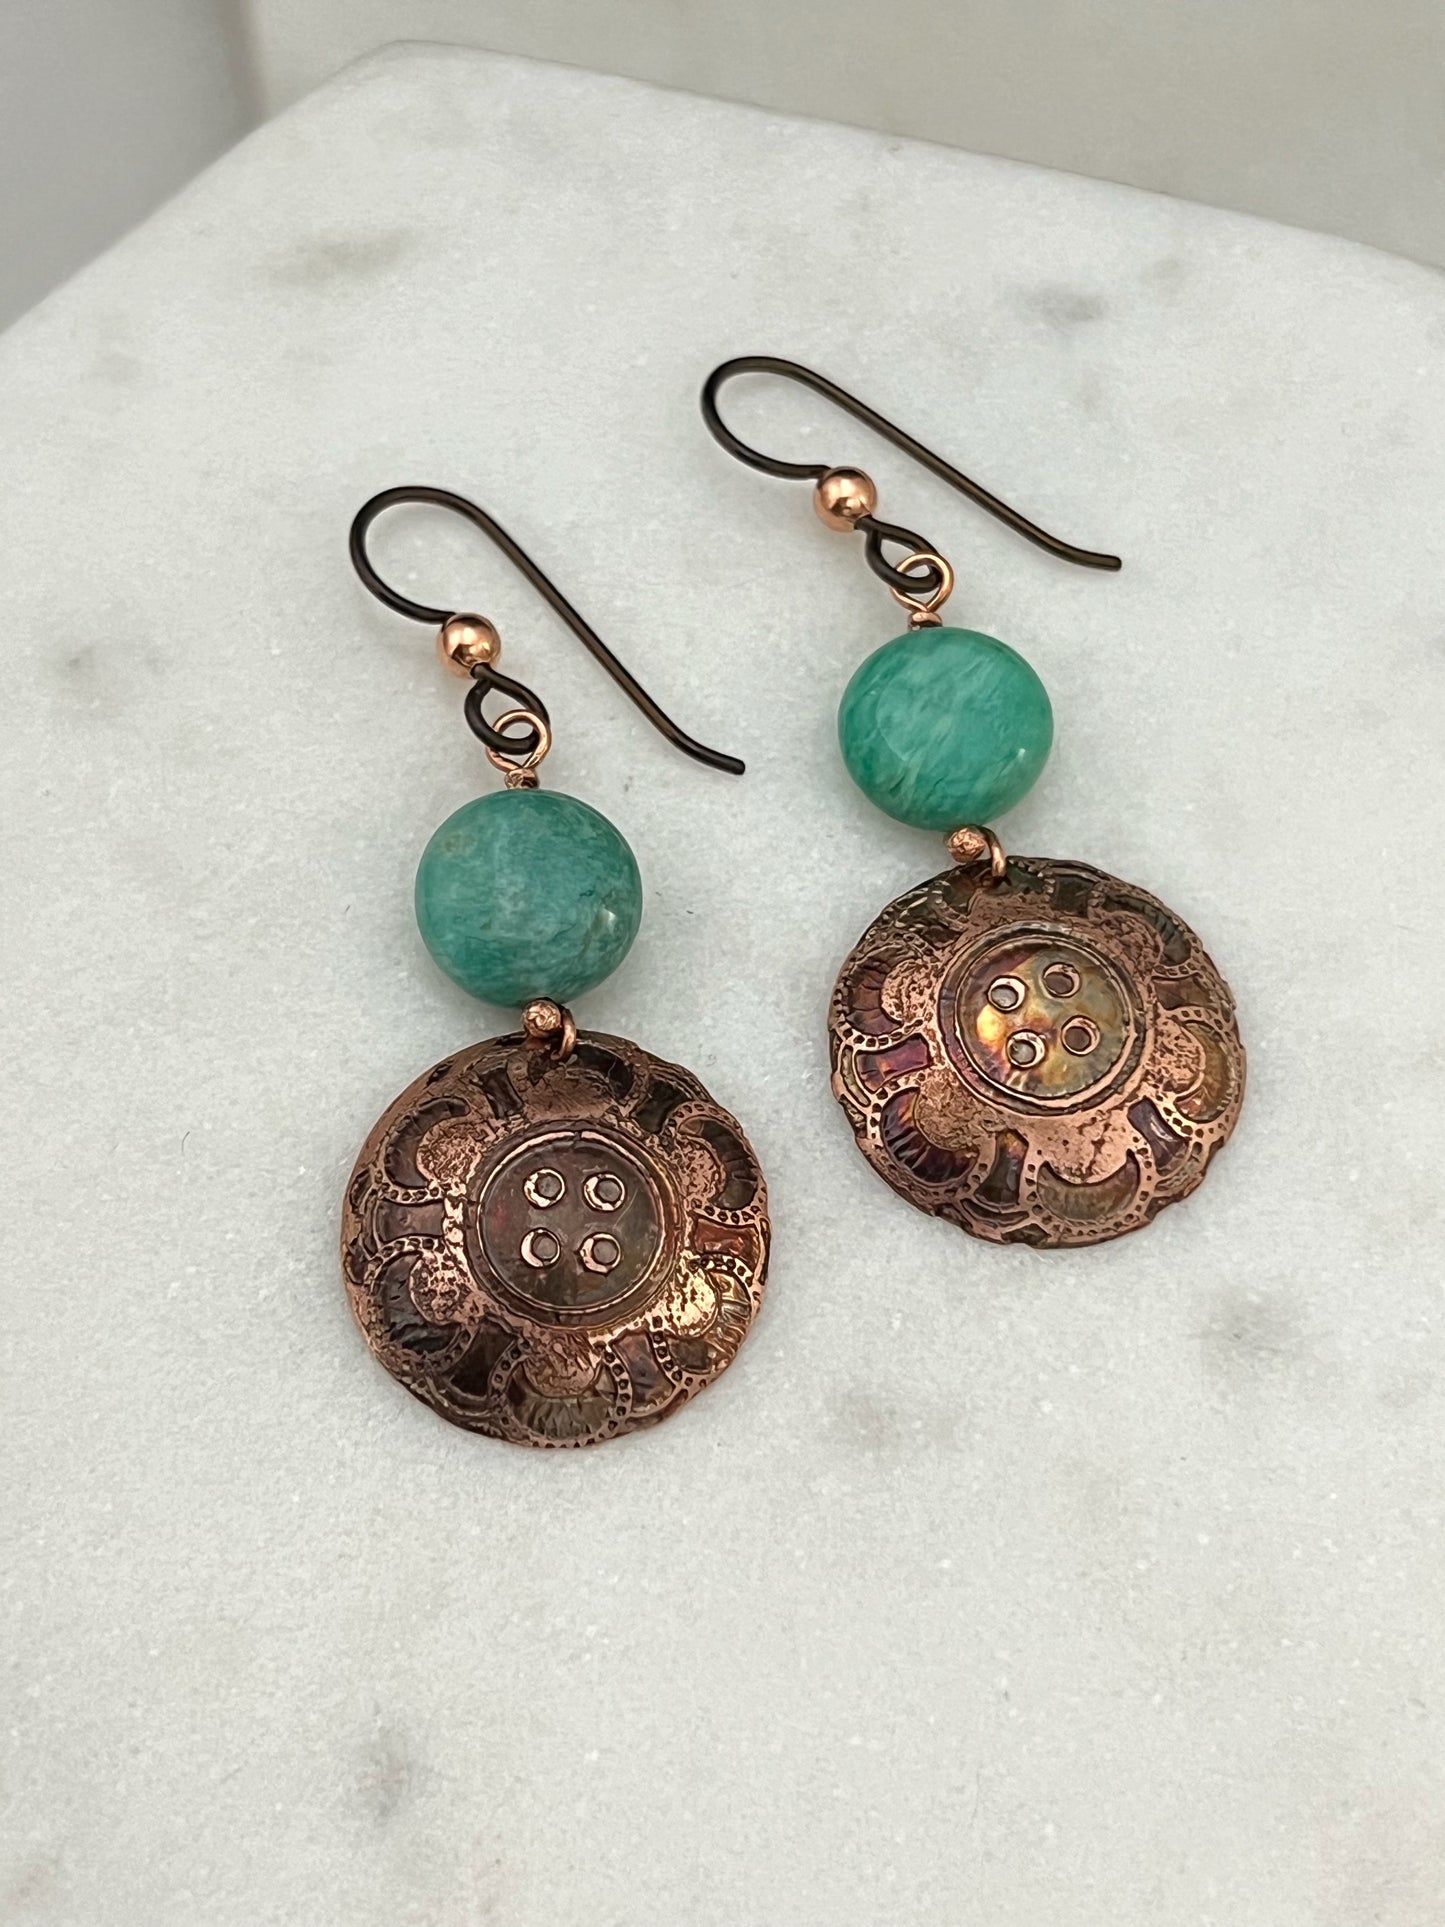 Acid etched copper earrings with amazonite gemstones